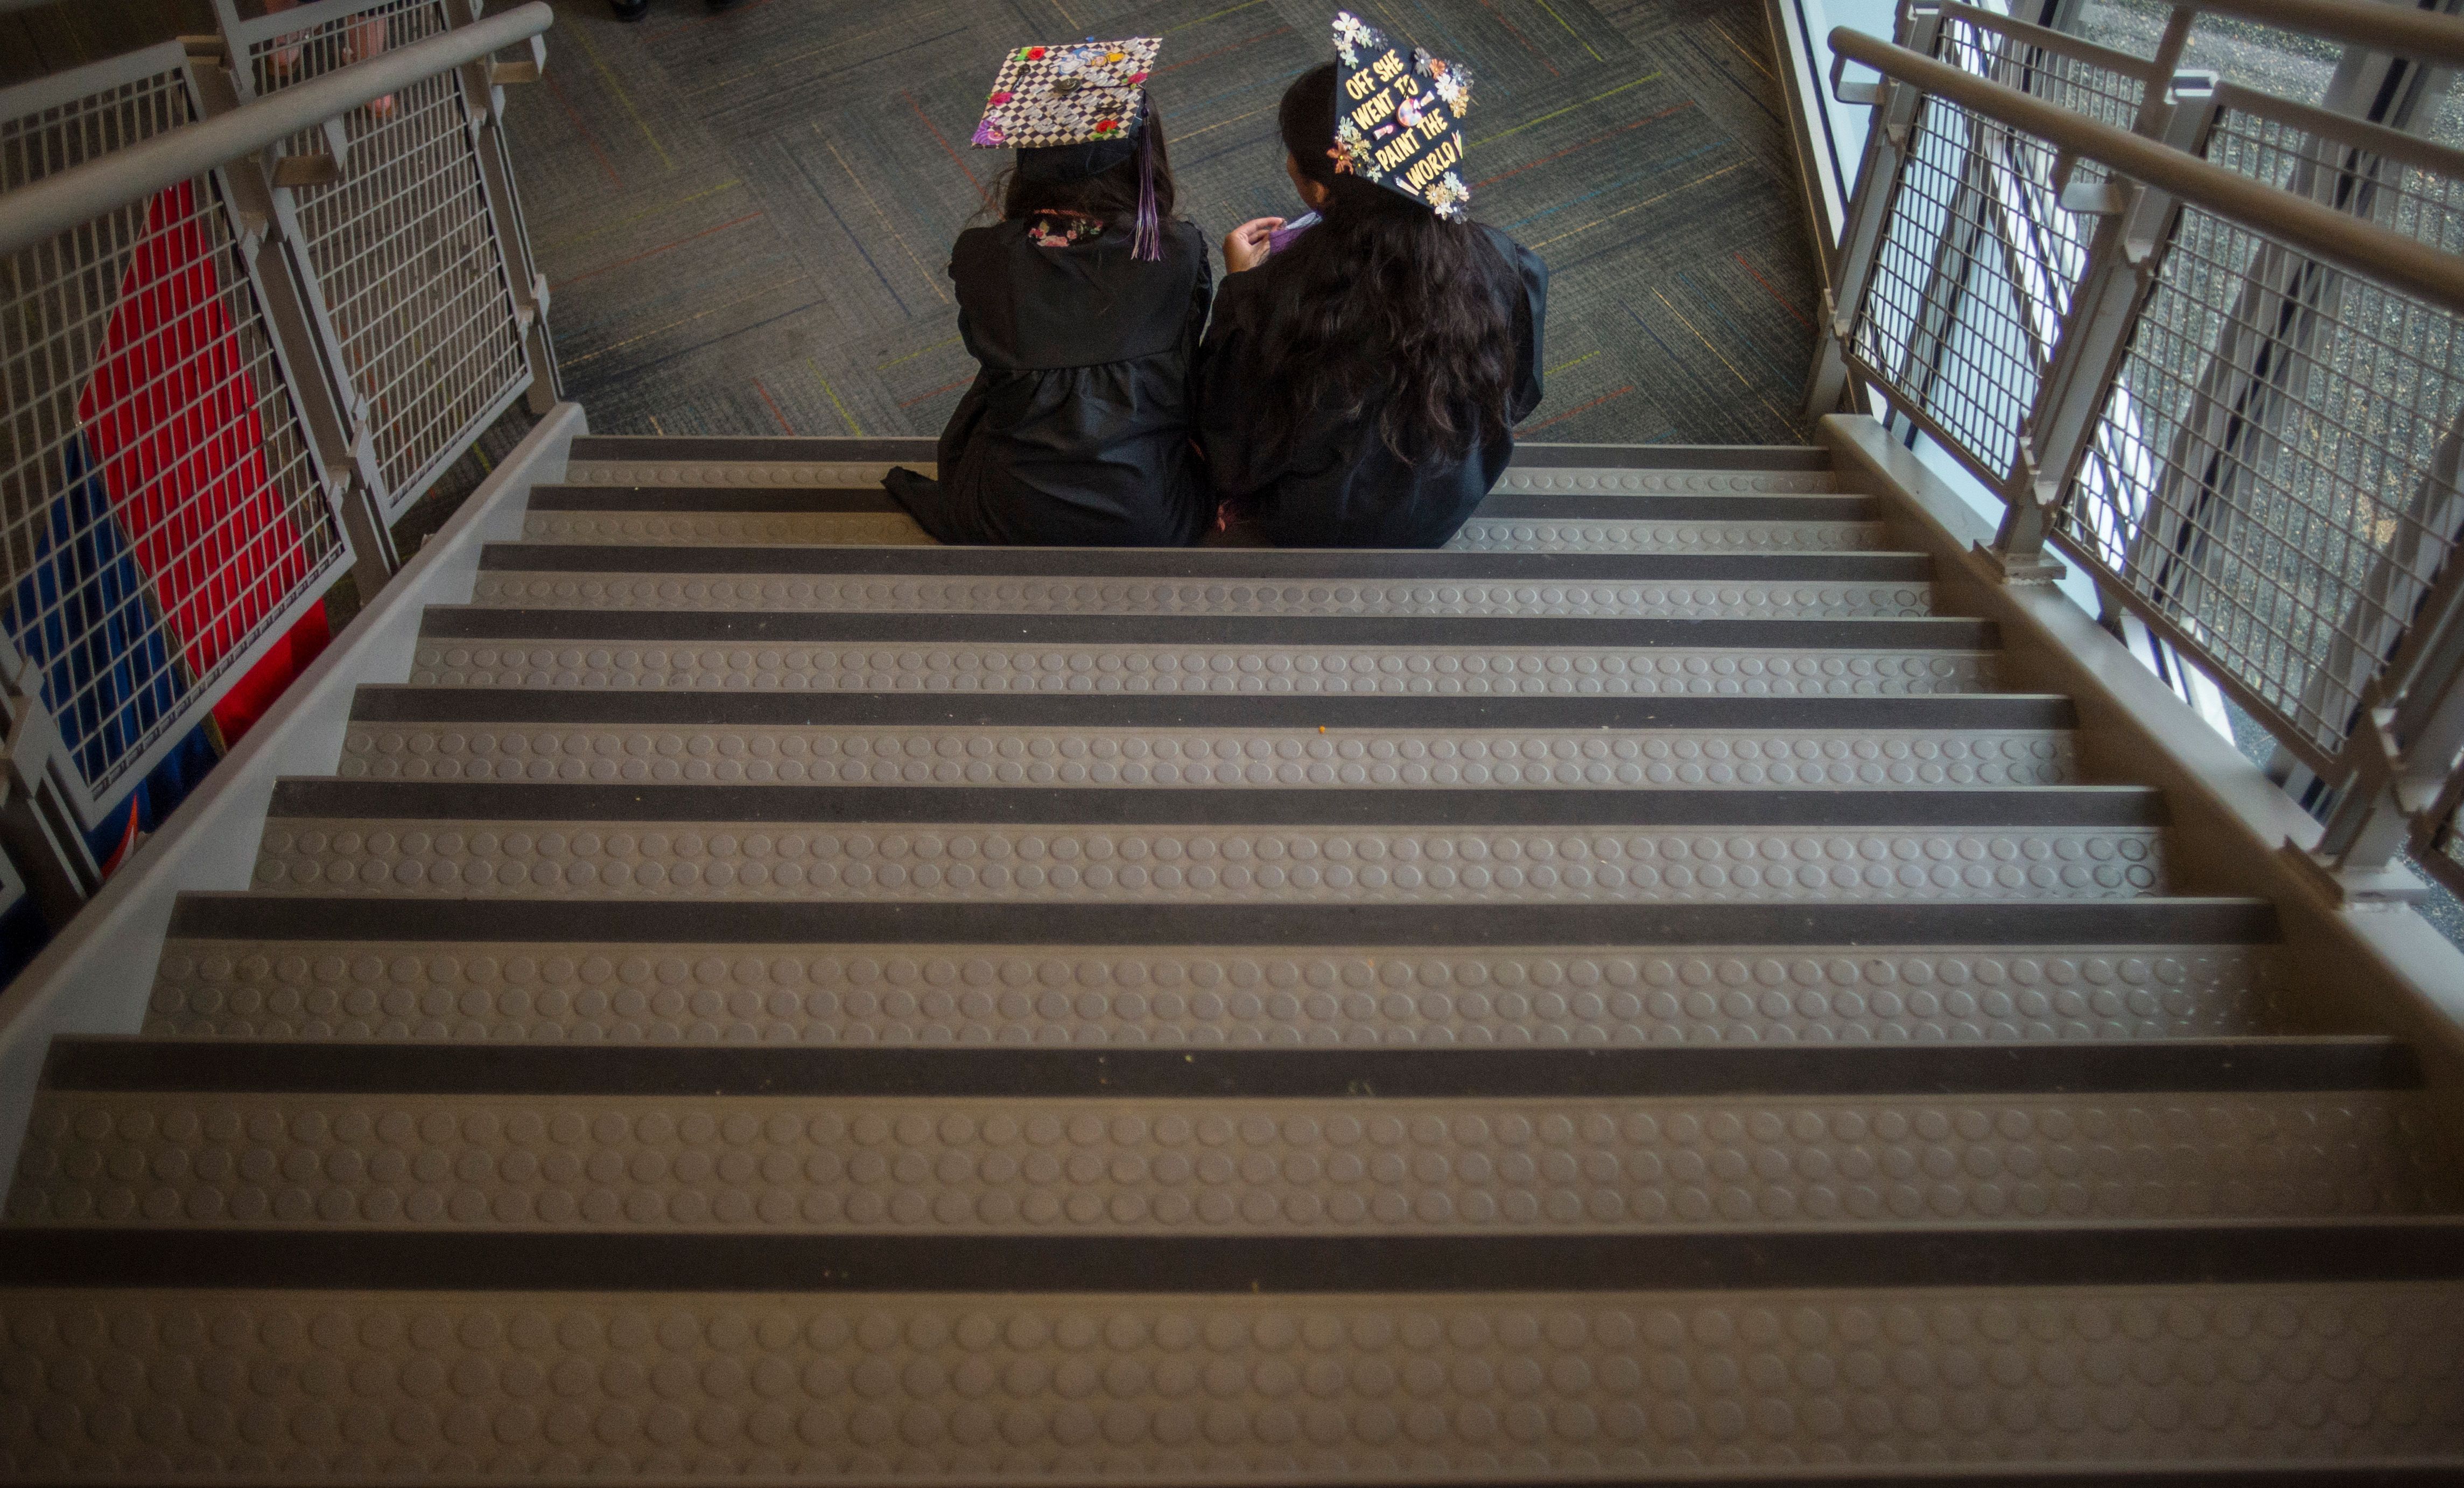 High school graduates in caps and gowns sit on a staircase.